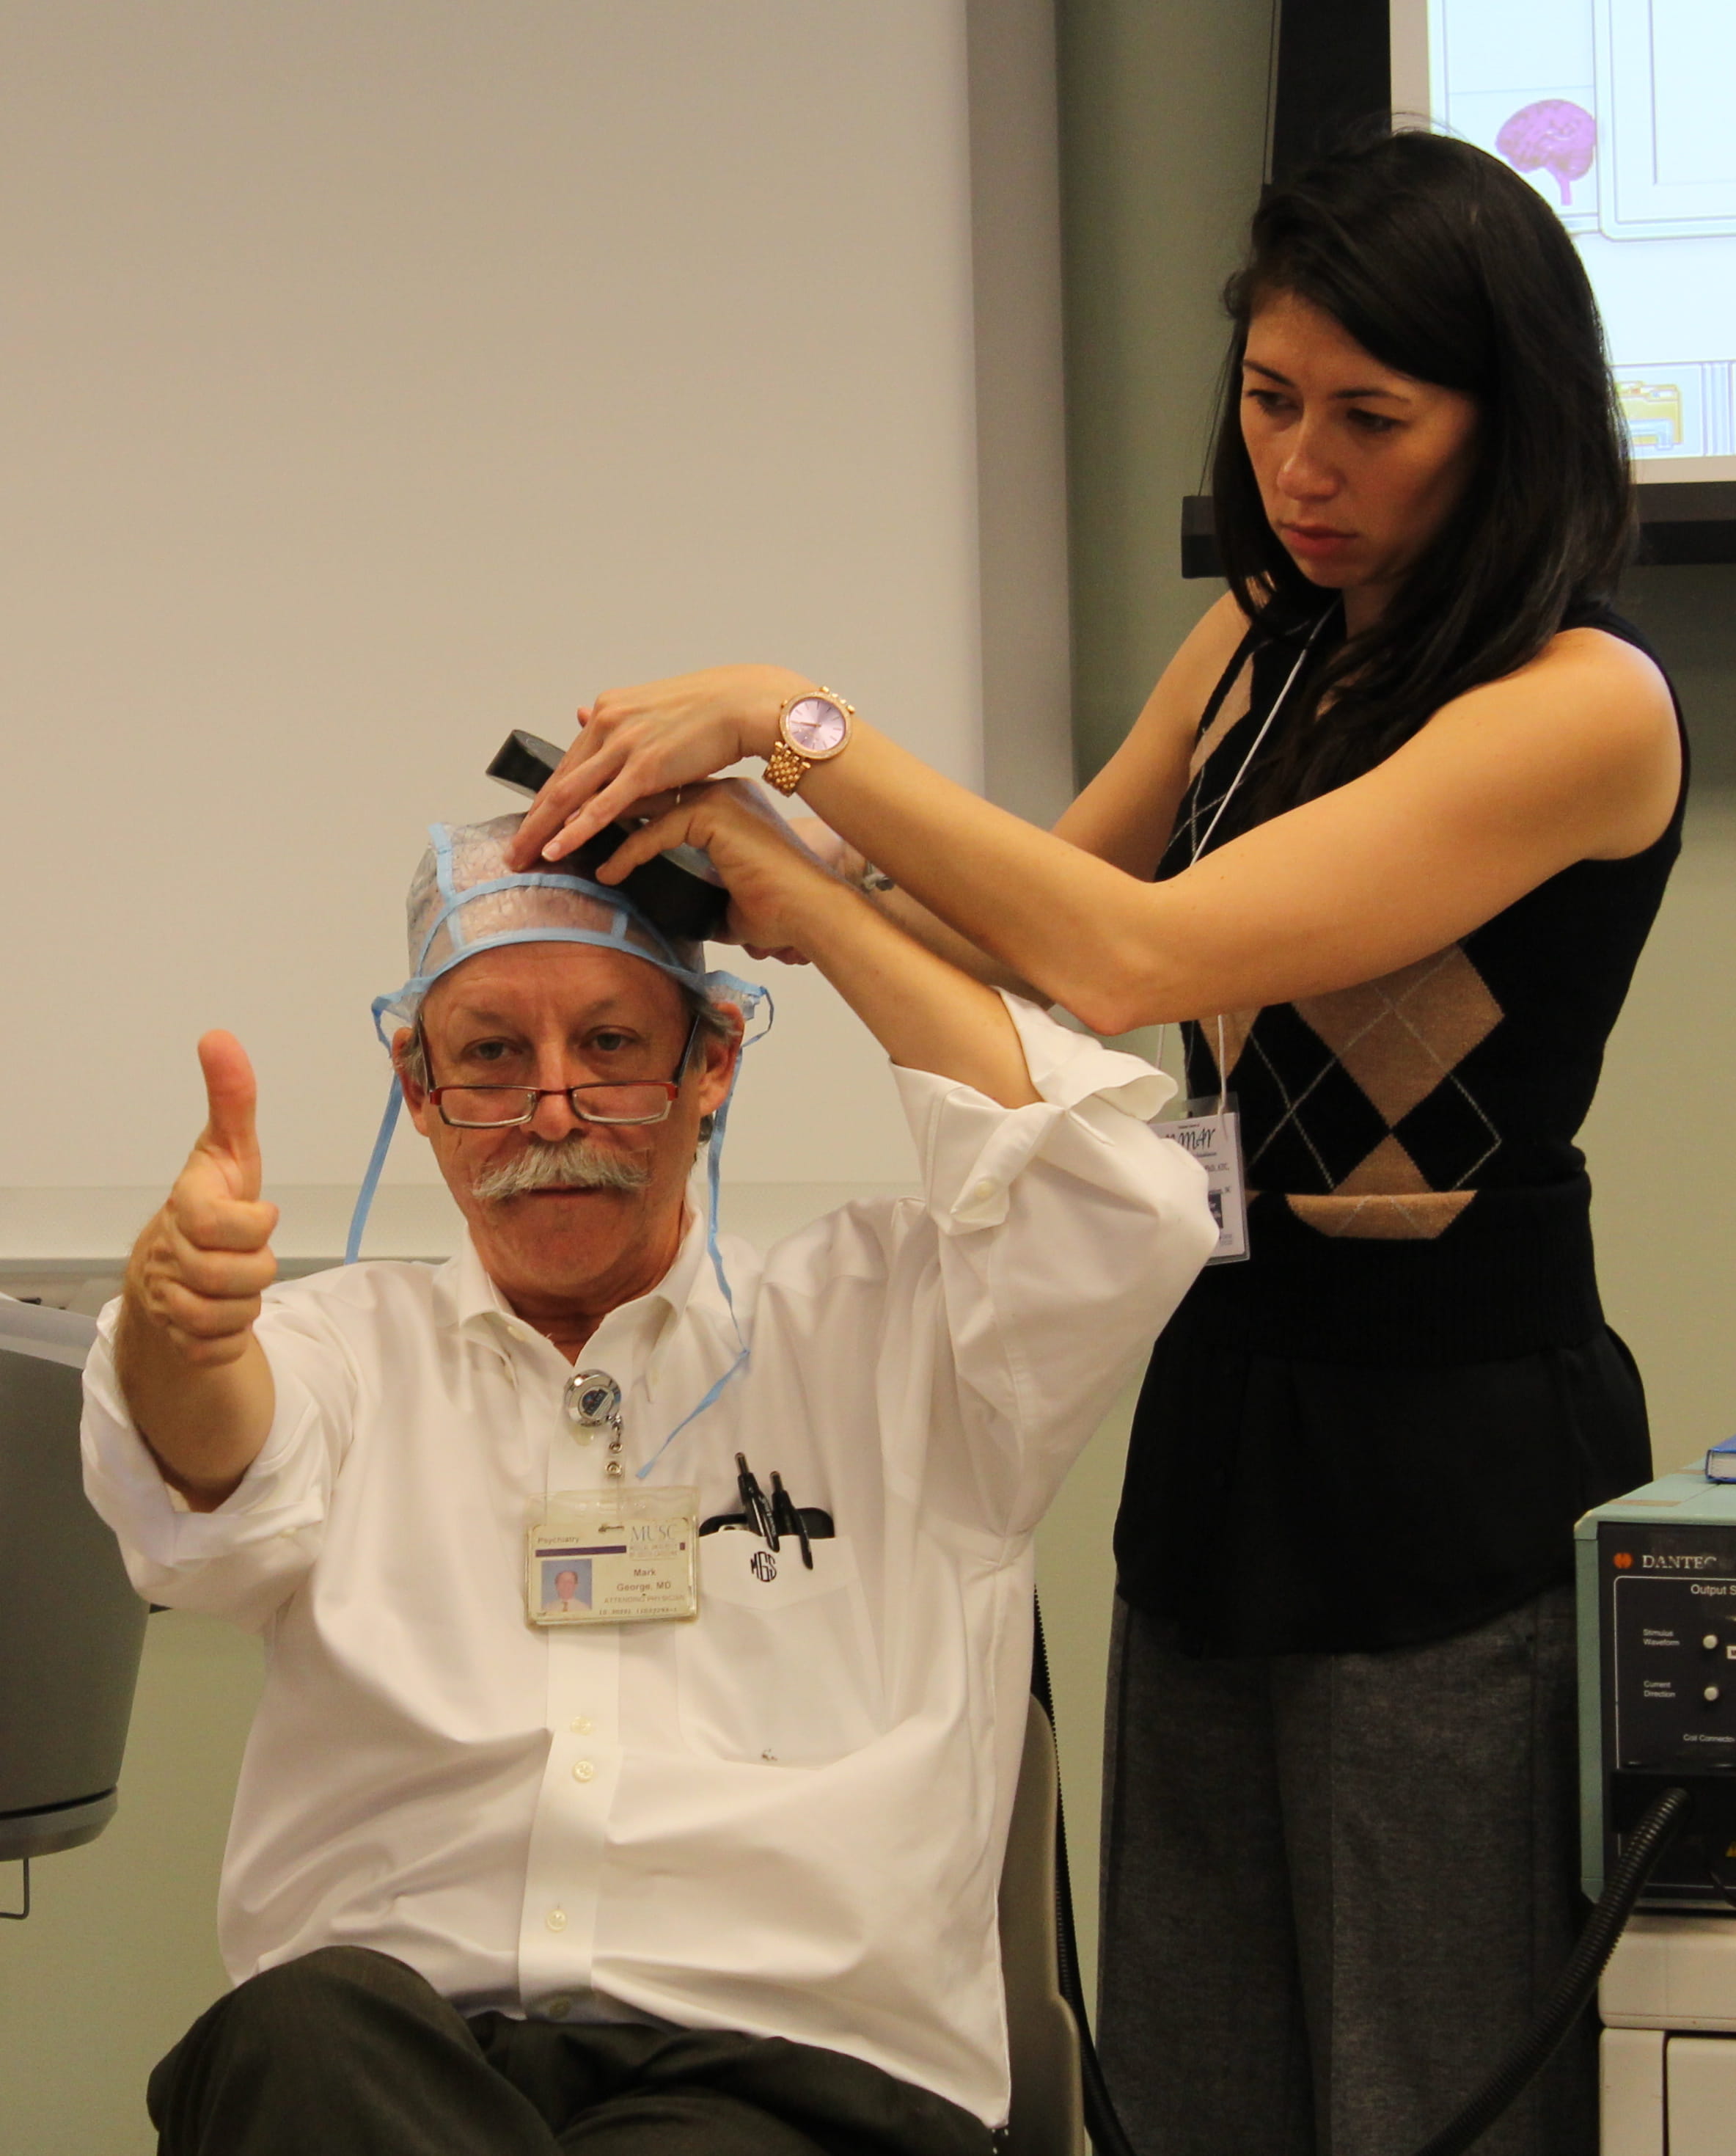 Demonstration of finding motor threshold with transcranial magnetic stimulation 